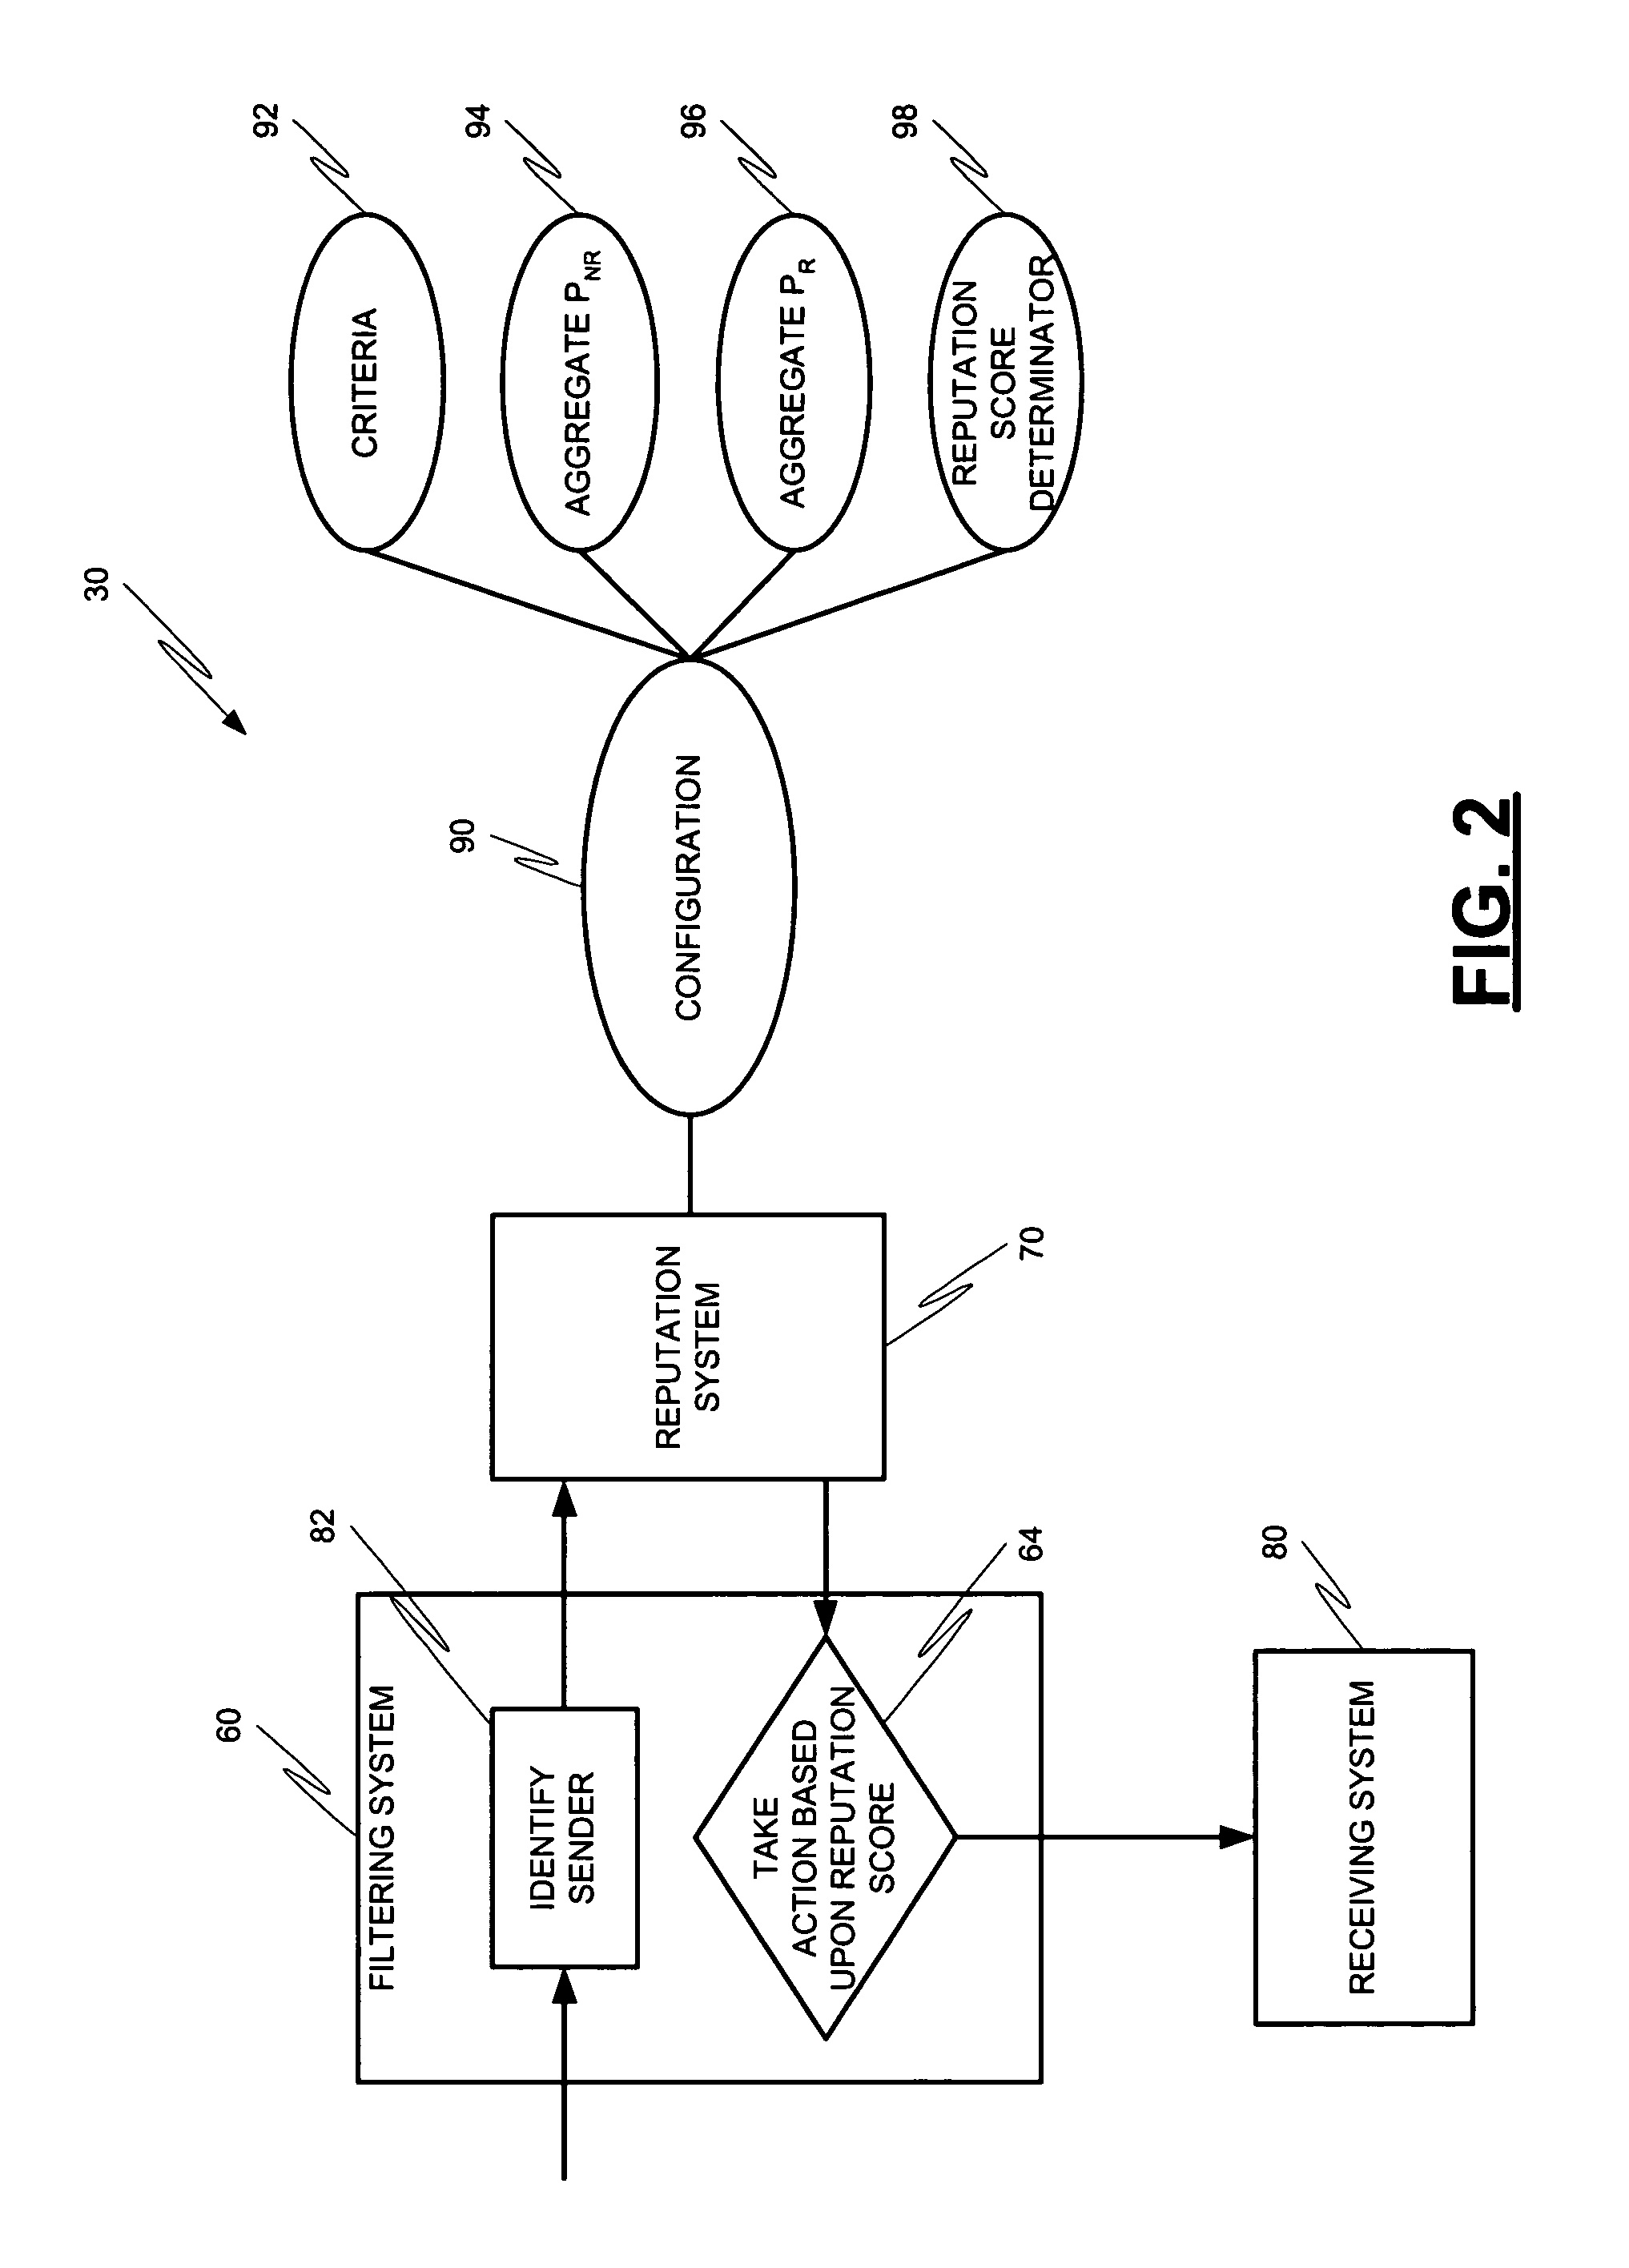 Systems and methods for classification of messaging entities